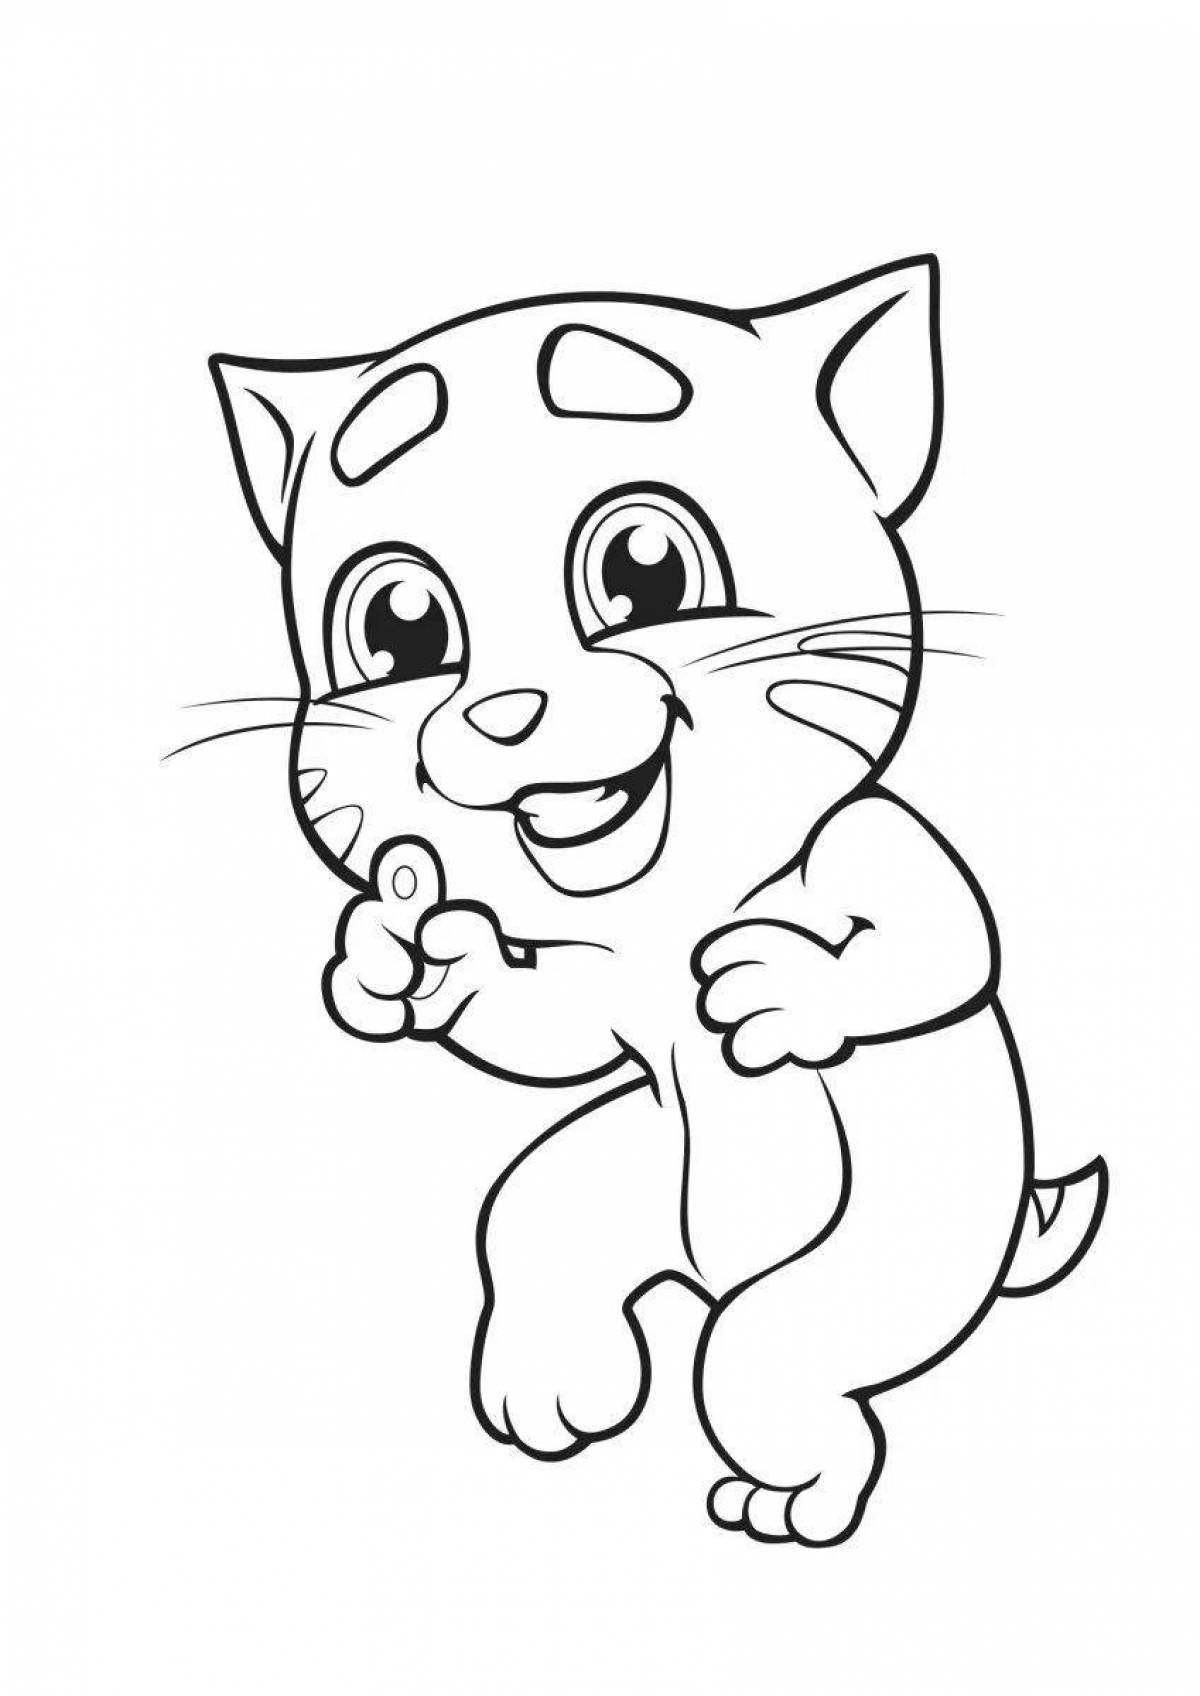 Coloring book cheerful booboo cat